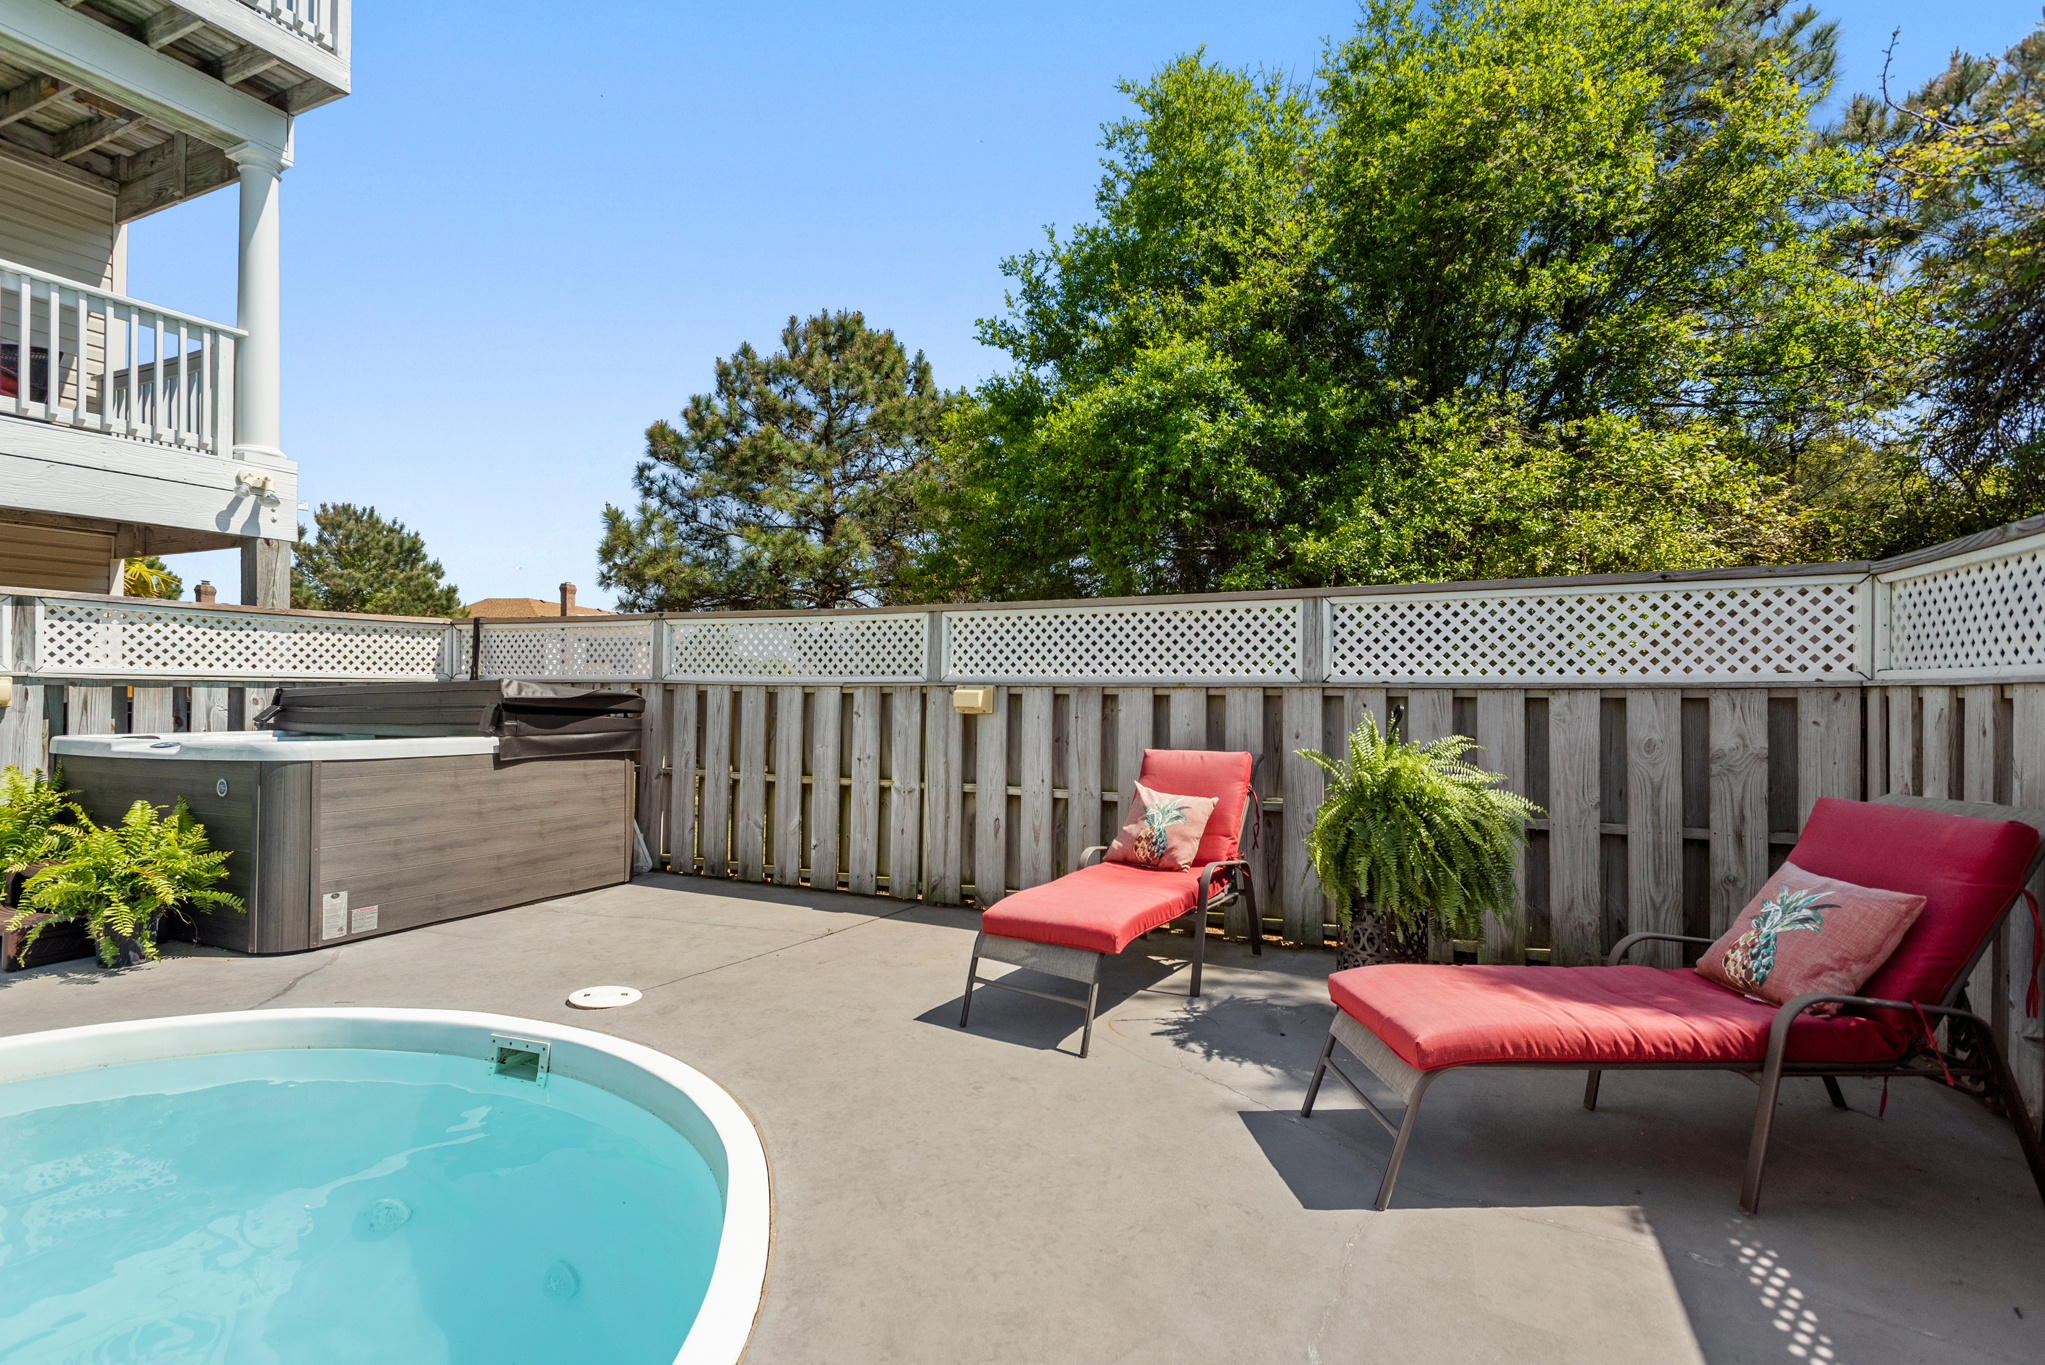 KH9527: Private Pool Area